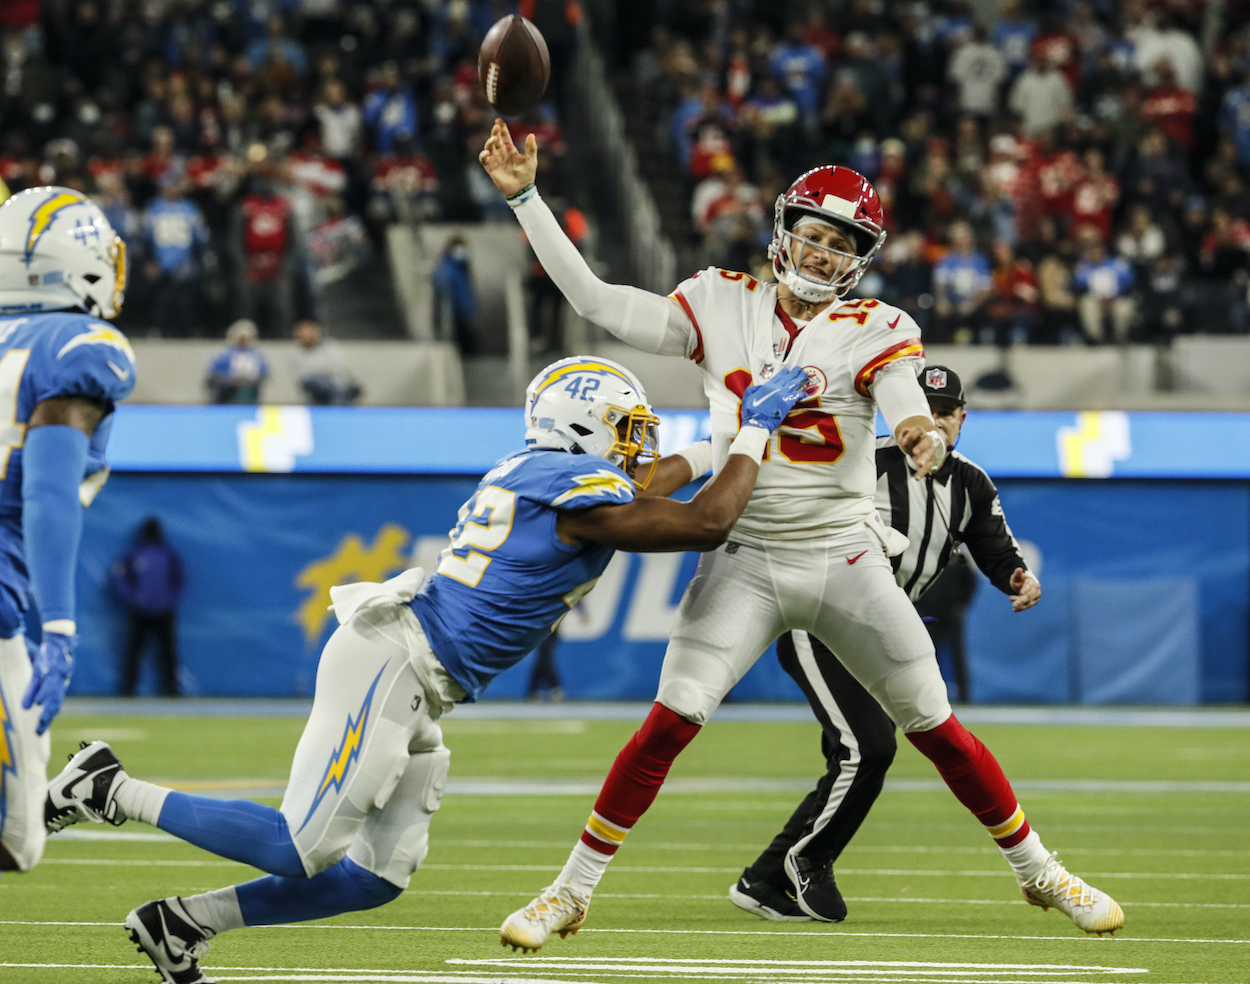 Patrick Mahomes attempts a pass while getting tackled.